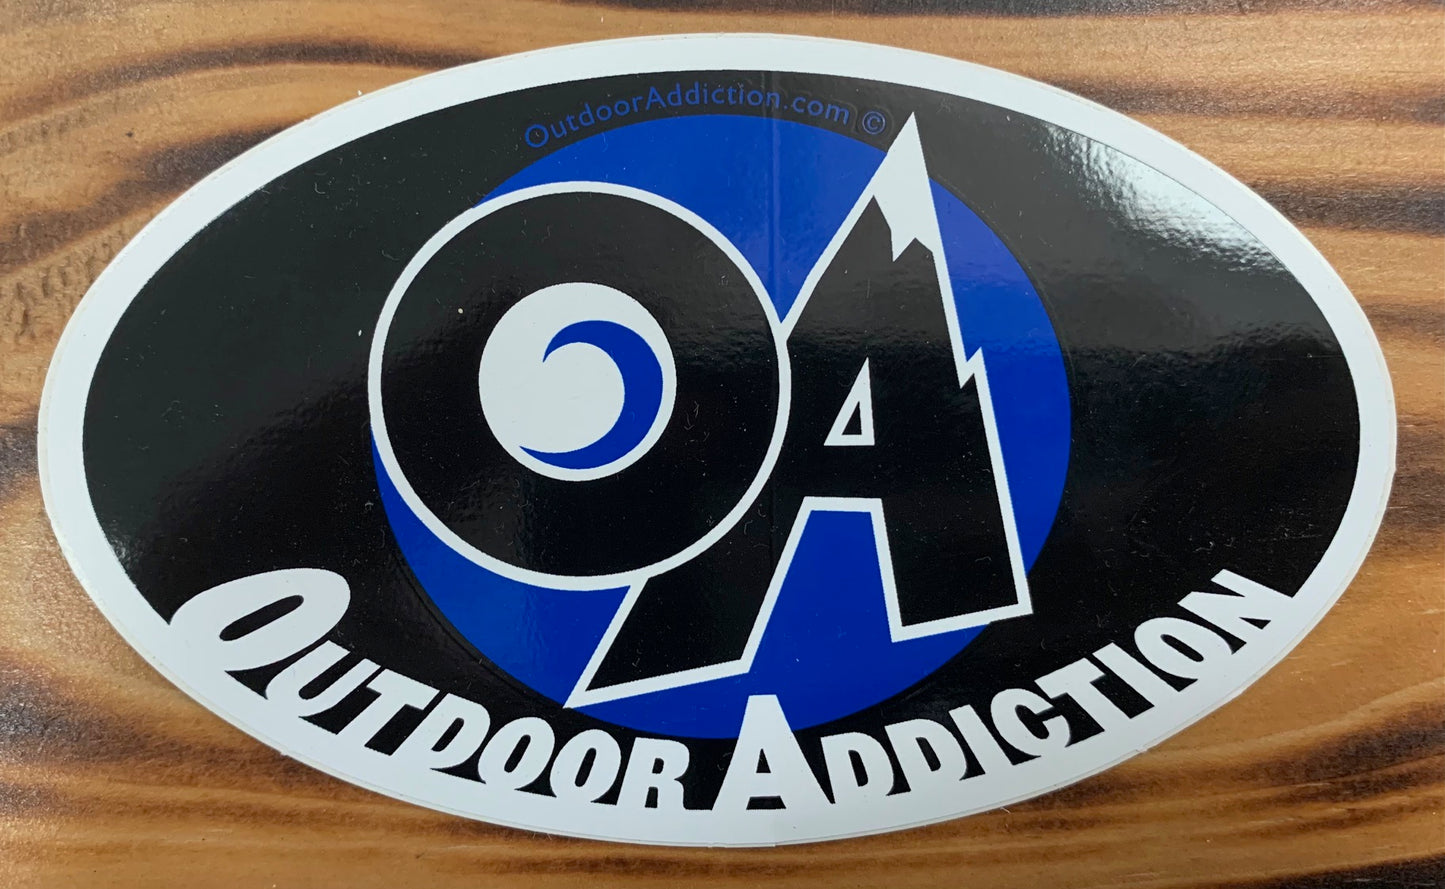 Outdoor Addiction Stickers, Large